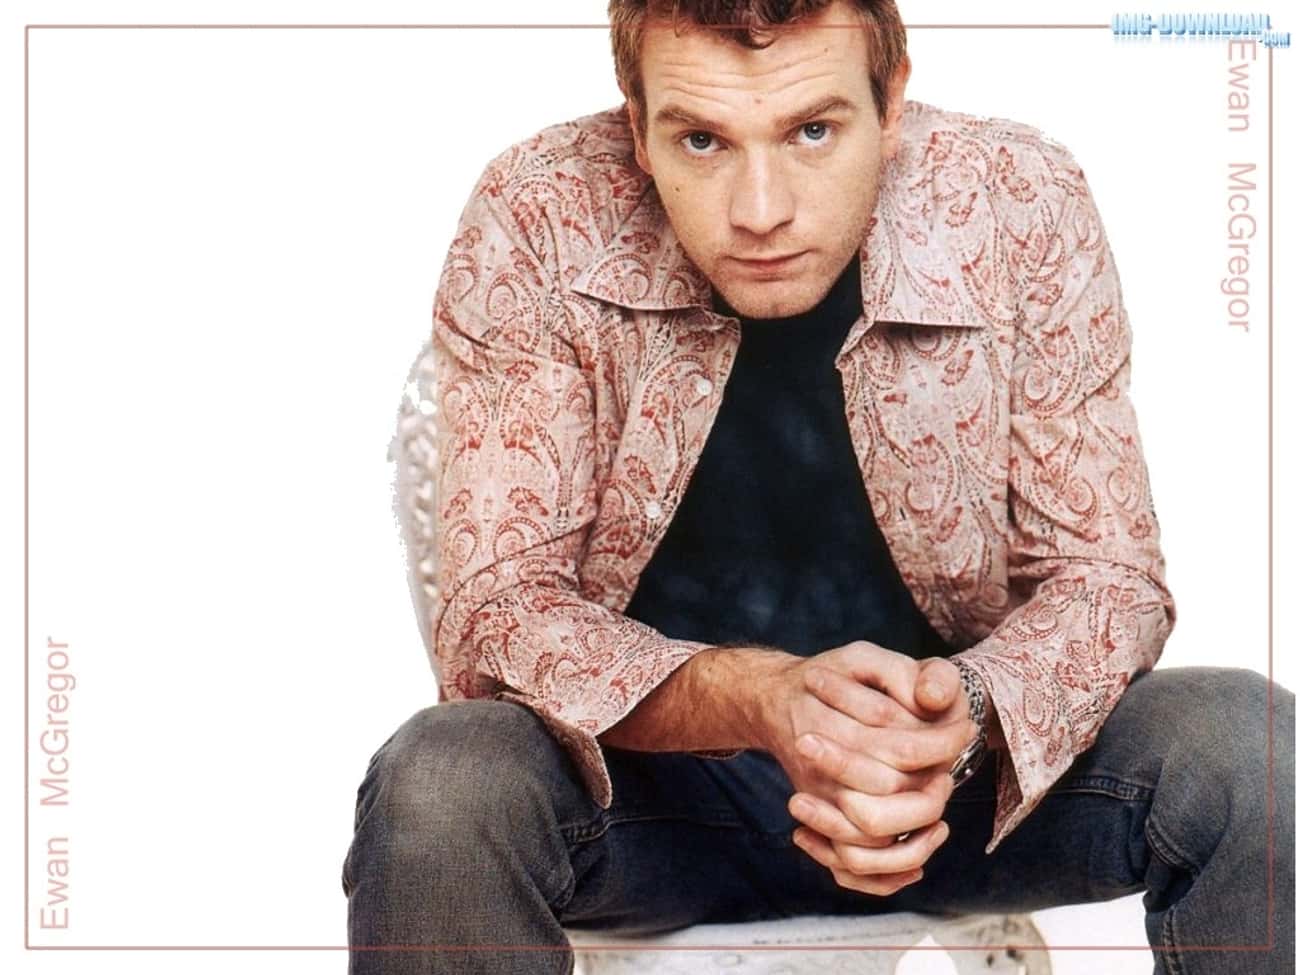 Ewan McGregor in Abstract Polo with Shirt Insert